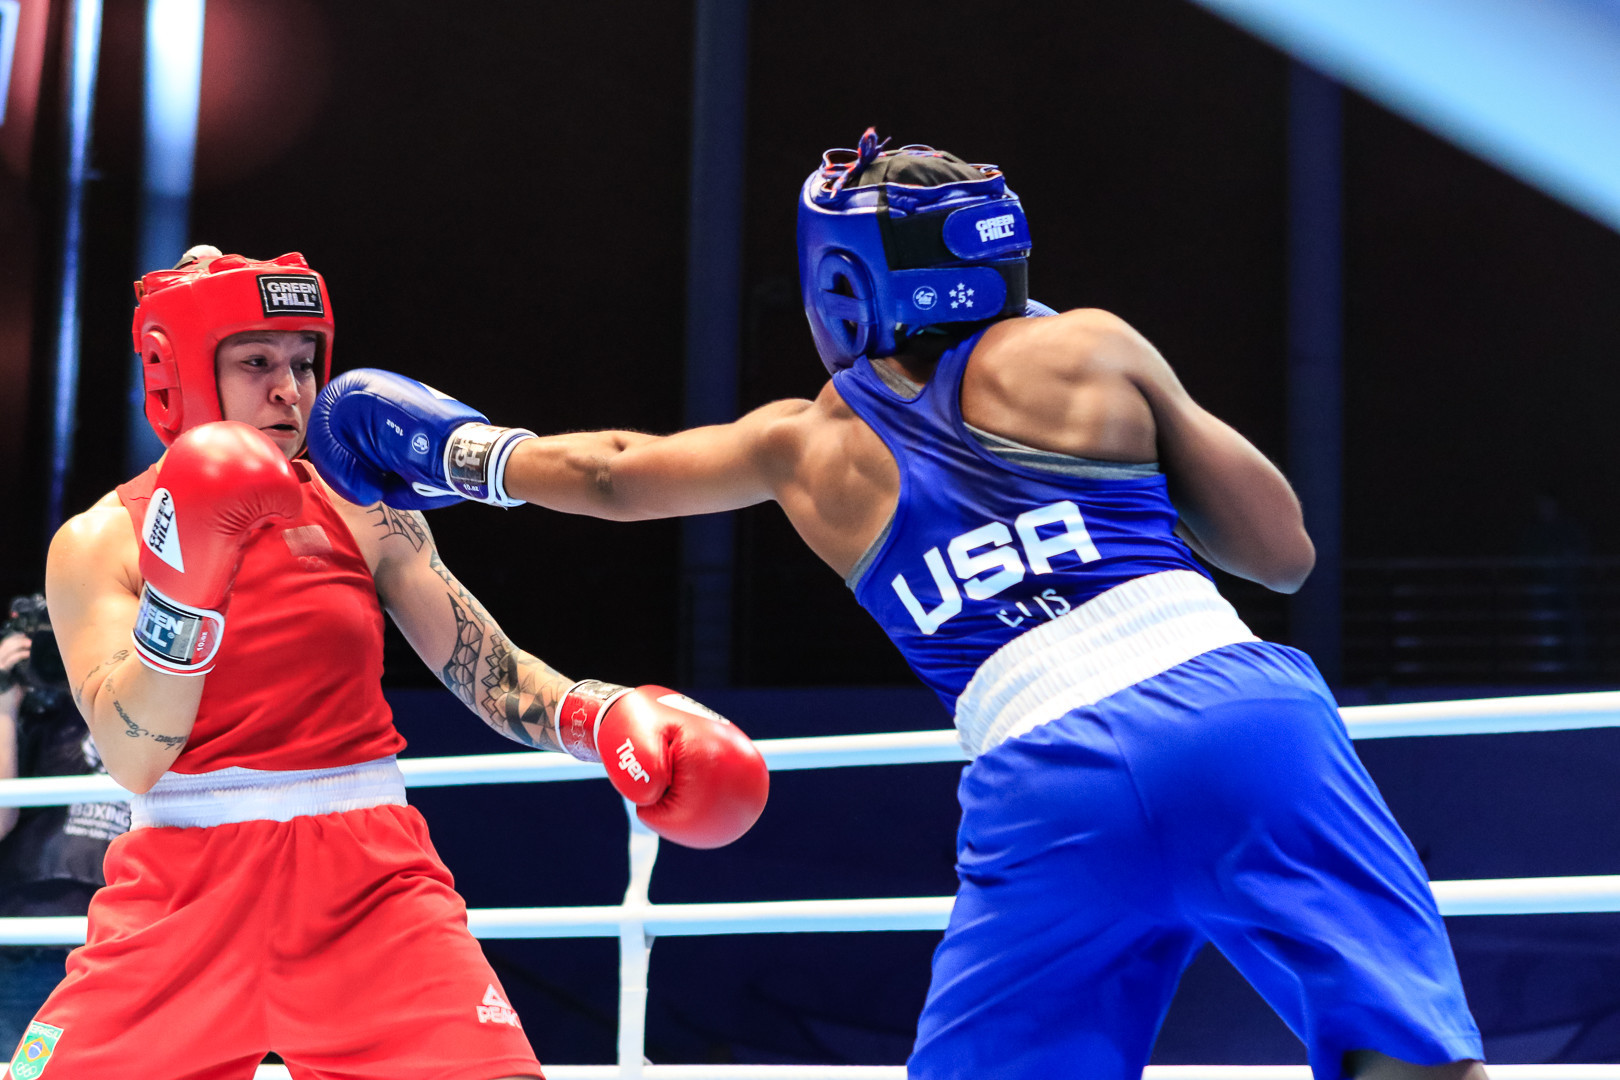 Pan American Games lightweight champion Beatriz Ferreira made the final with a 4-1 result over Rashida Ellis of the US ©AIBA